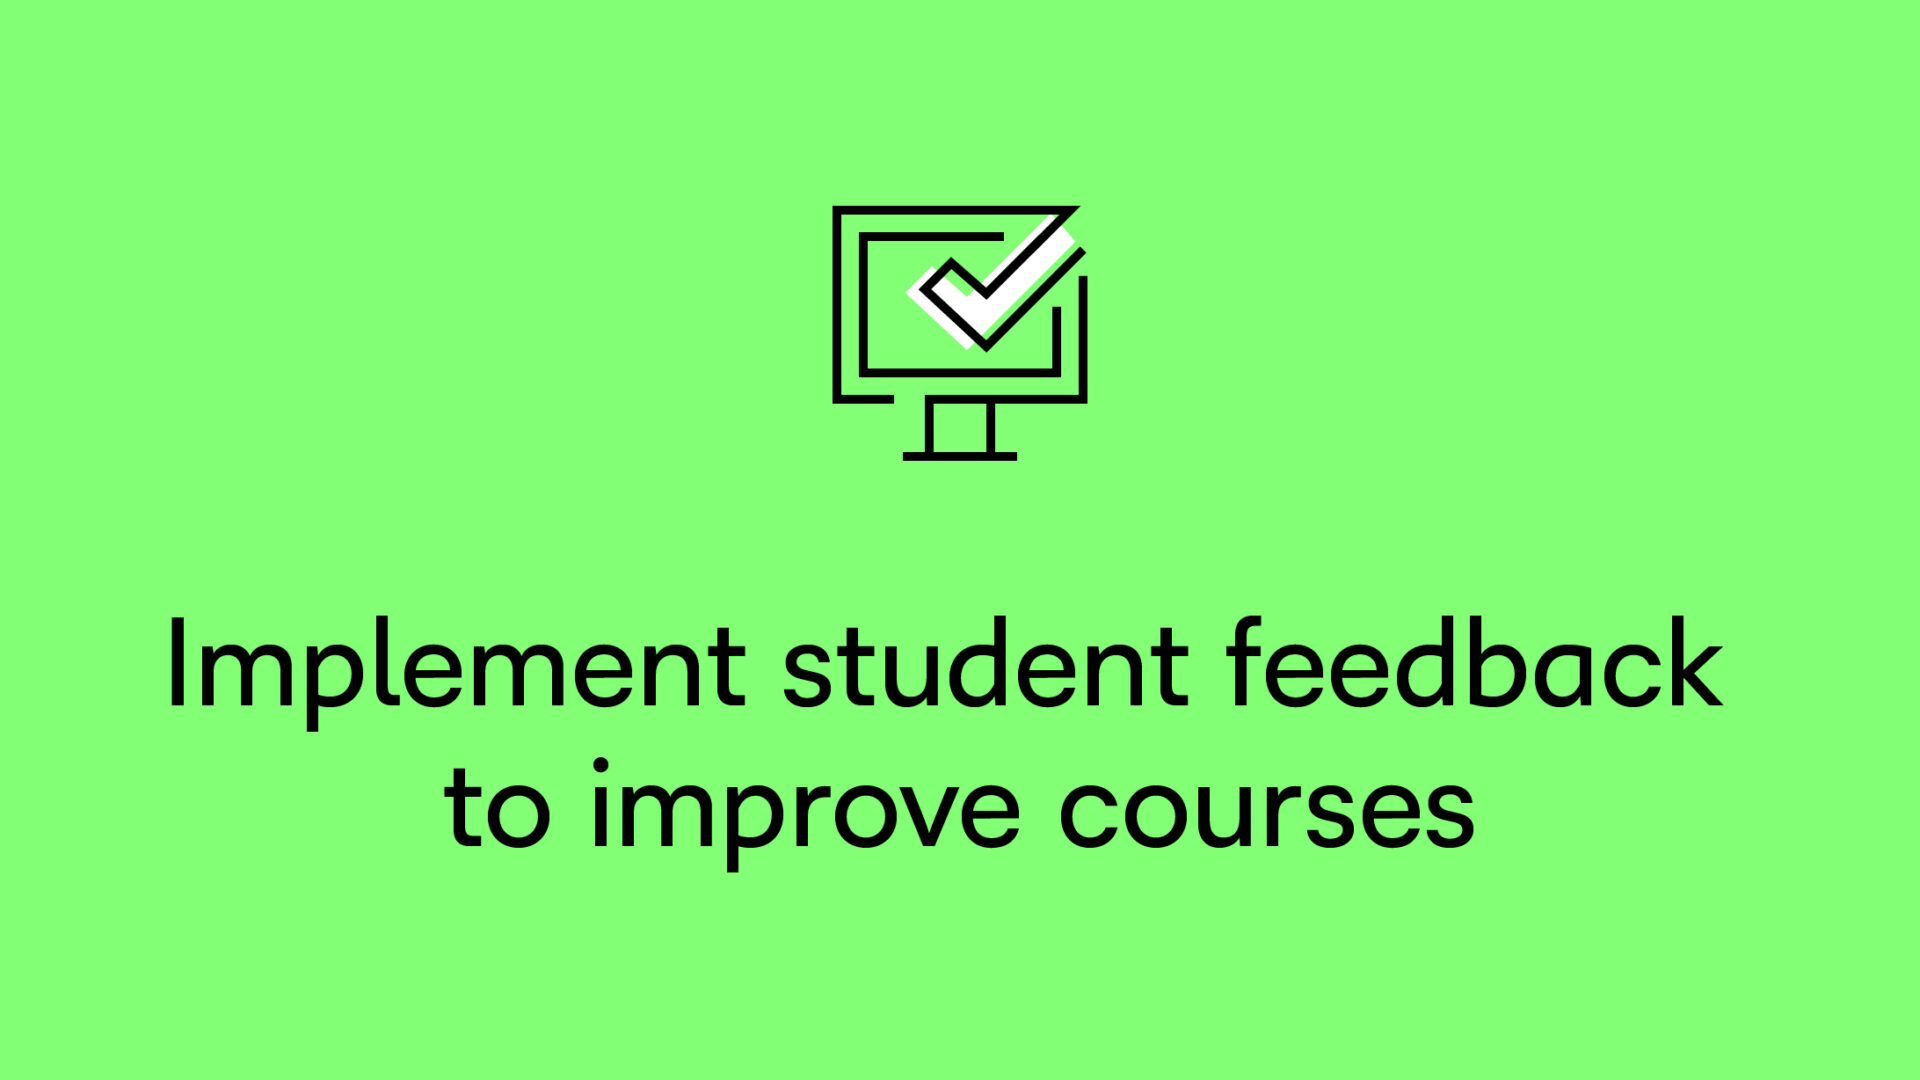 Implement student feedback to improve courses